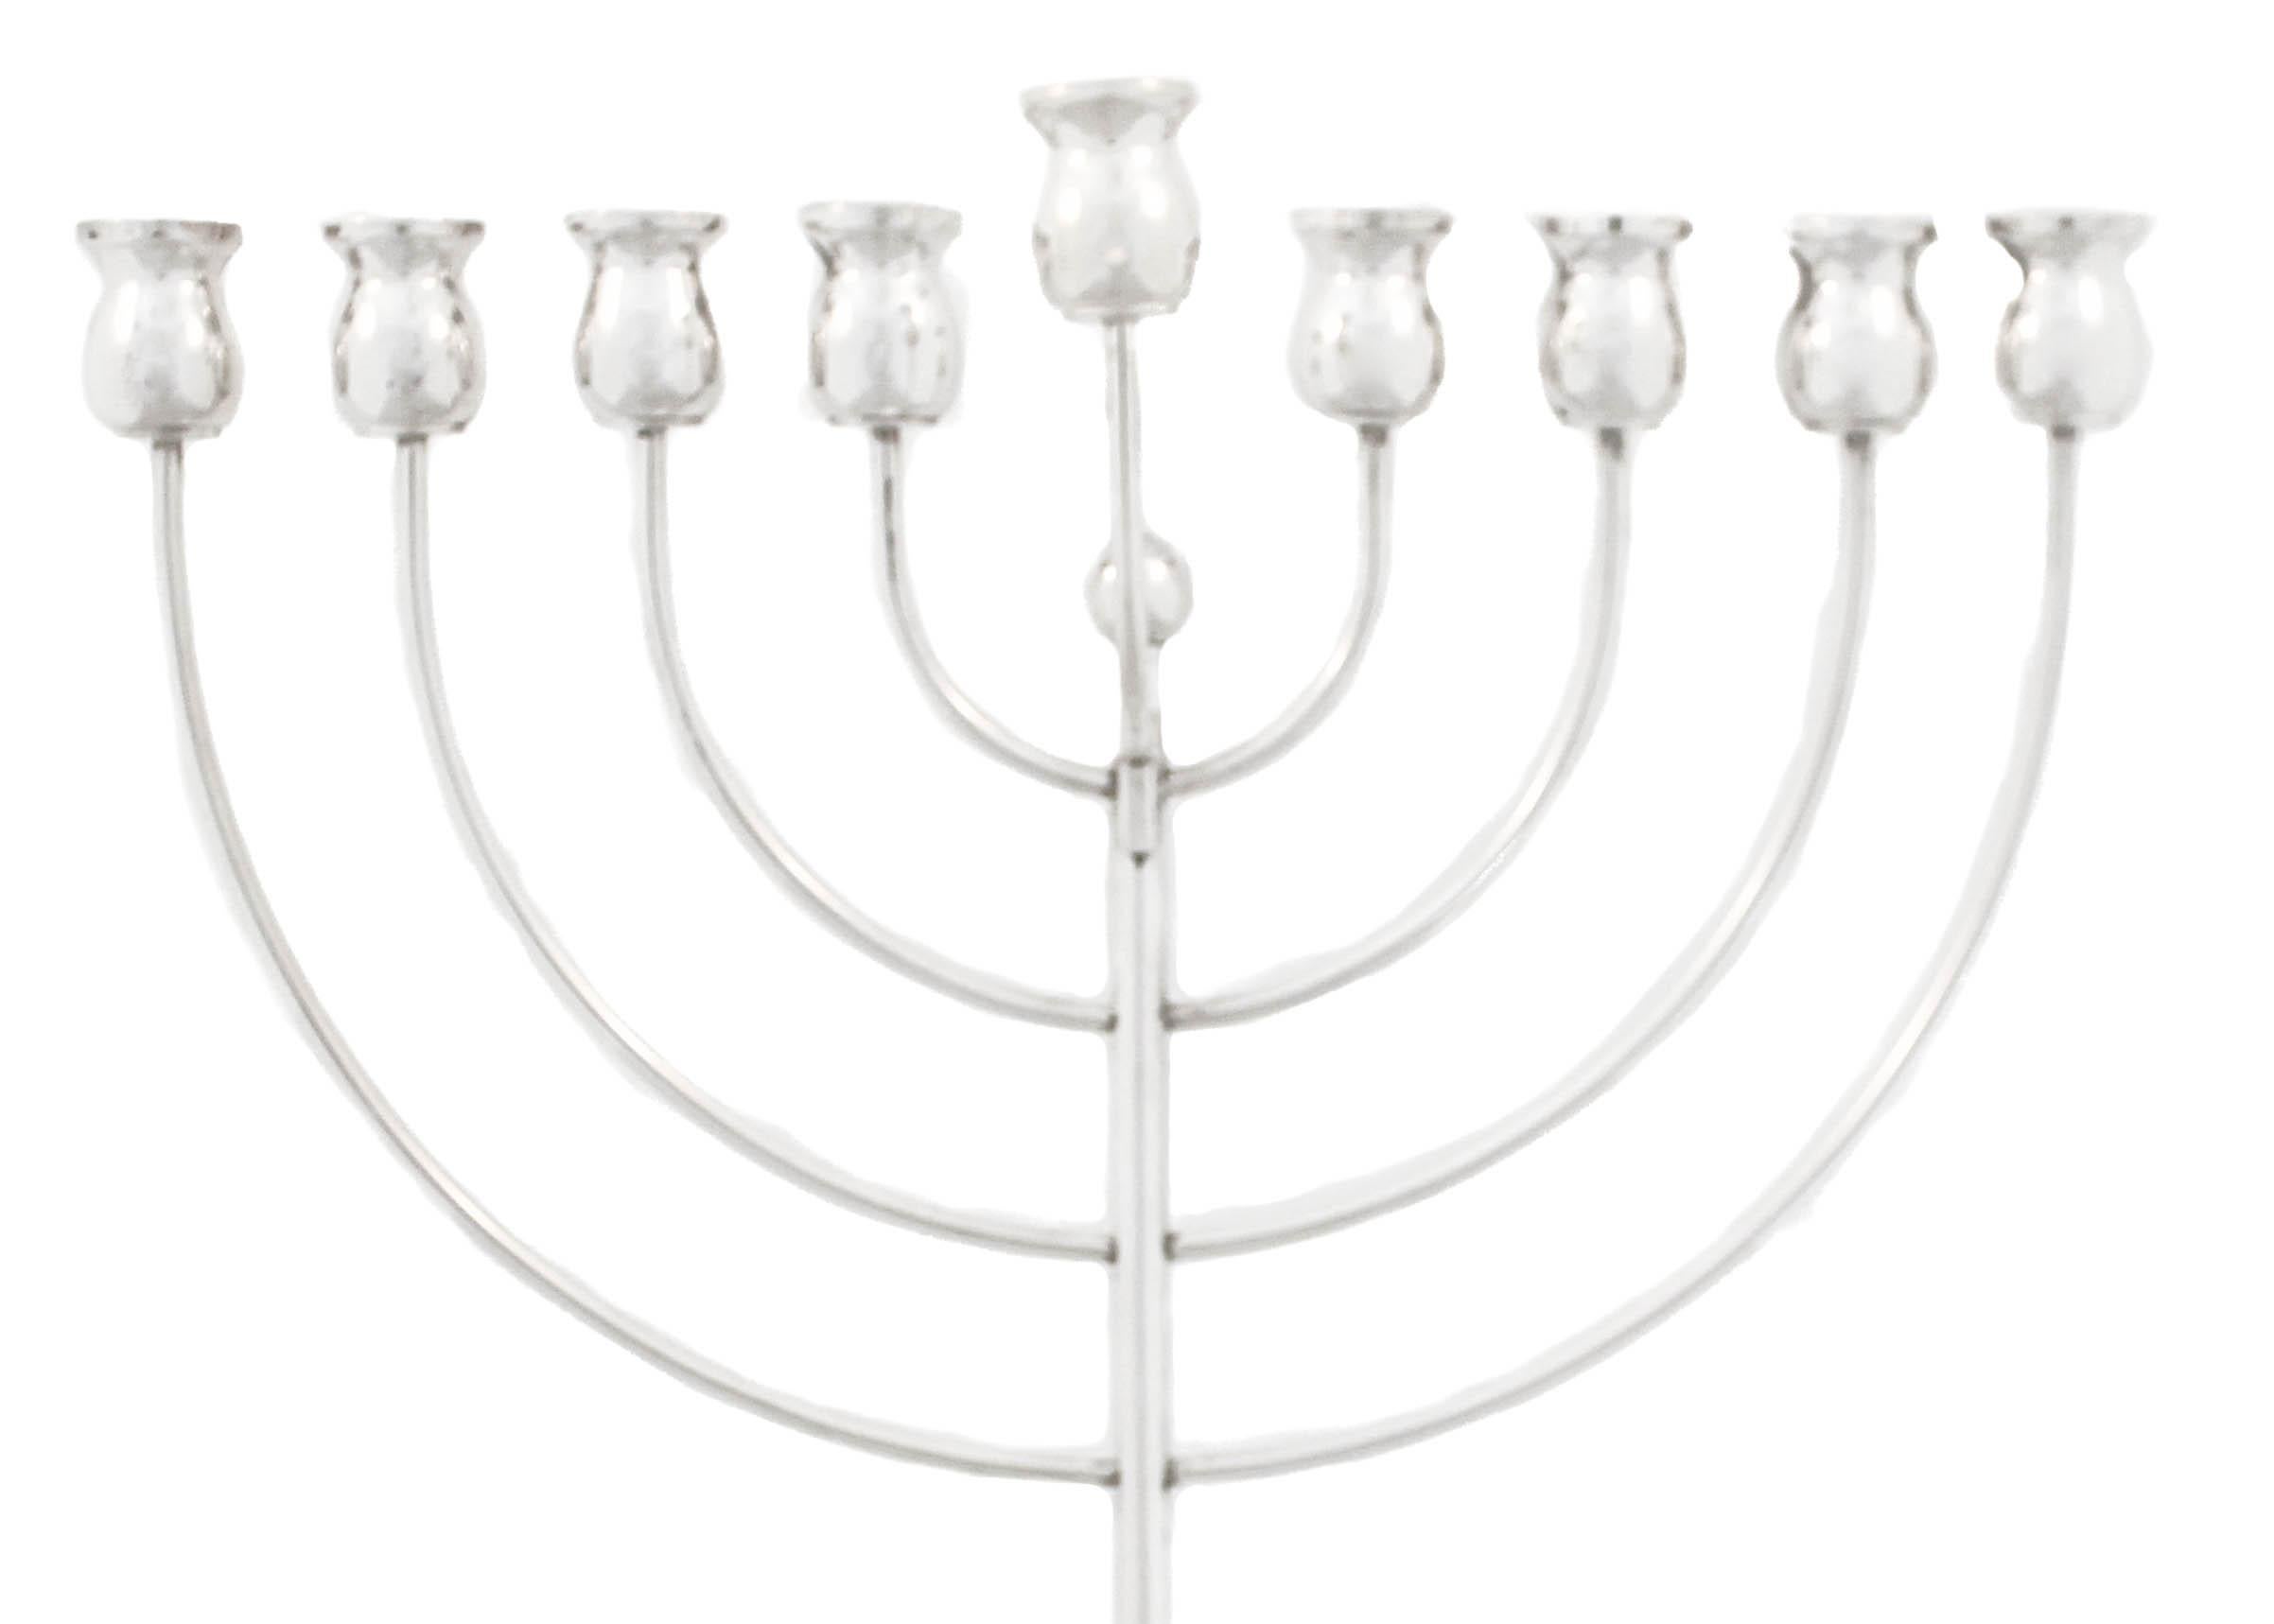 Being offered is a sterling silver menorah made in Italy.  It is sleek and modern without any ornamentation.  A young and contemporary style and design for an ancient tradition.  Bring in the holiday in style with this sterling silver menorah.